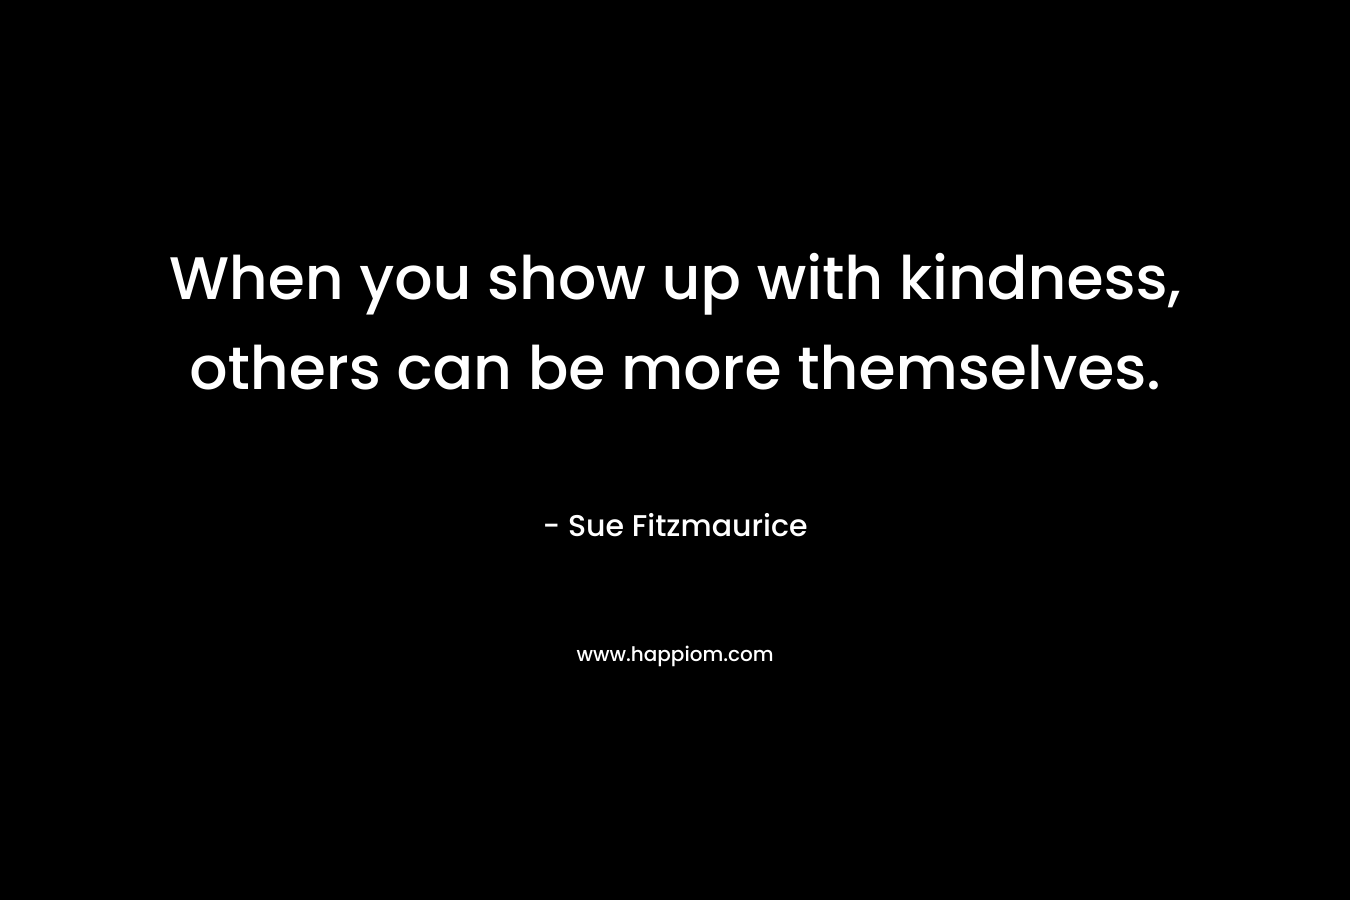 When you show up with kindness, others can be more themselves.